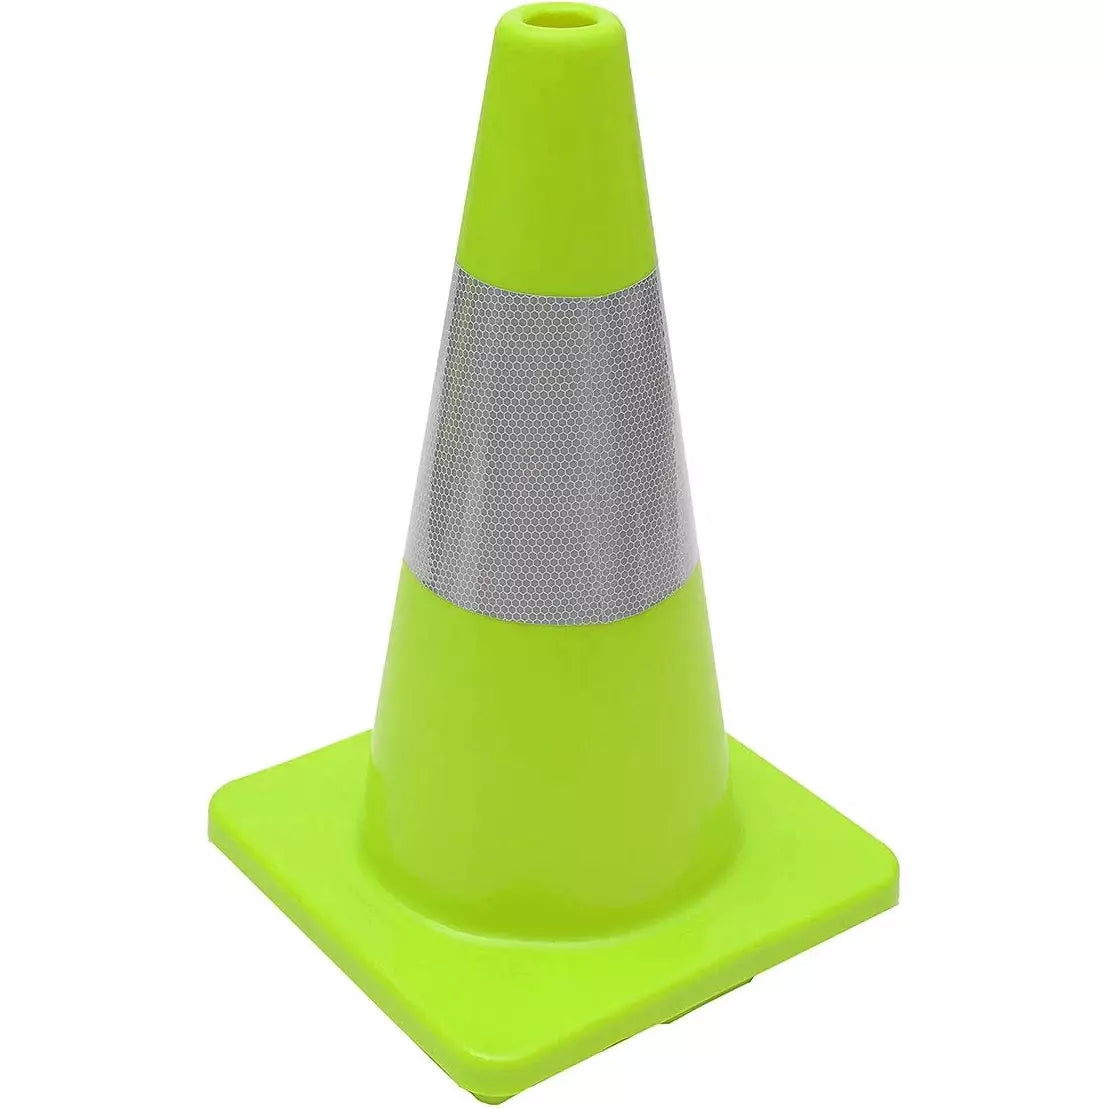 Reflective lime soft PVC traffic safety cone